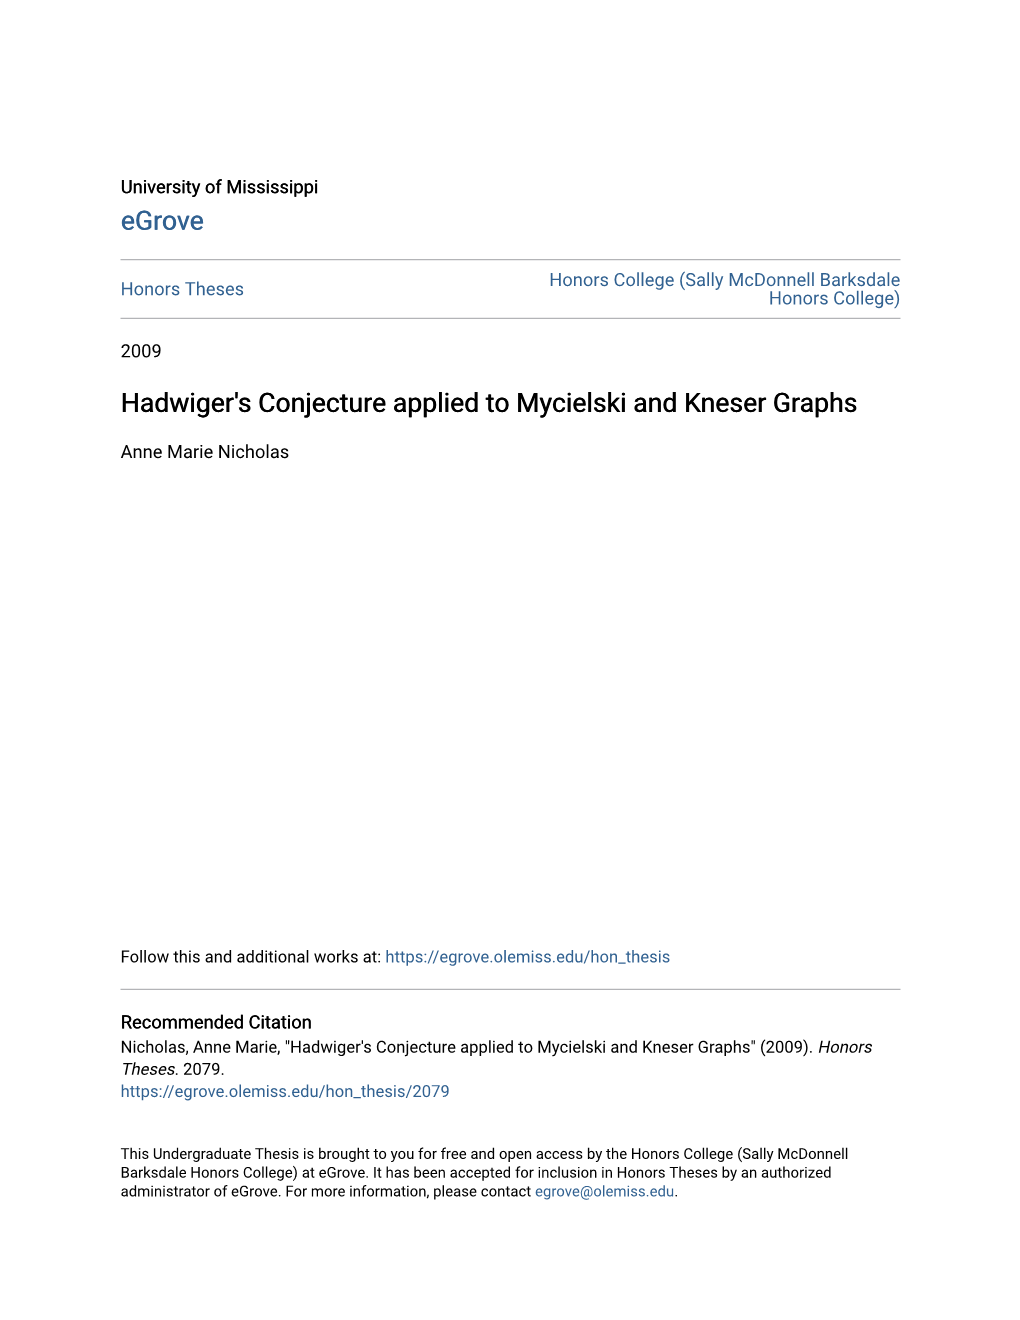 Hadwiger's Conjecture Applied to Mycielski and Kneser Graphs